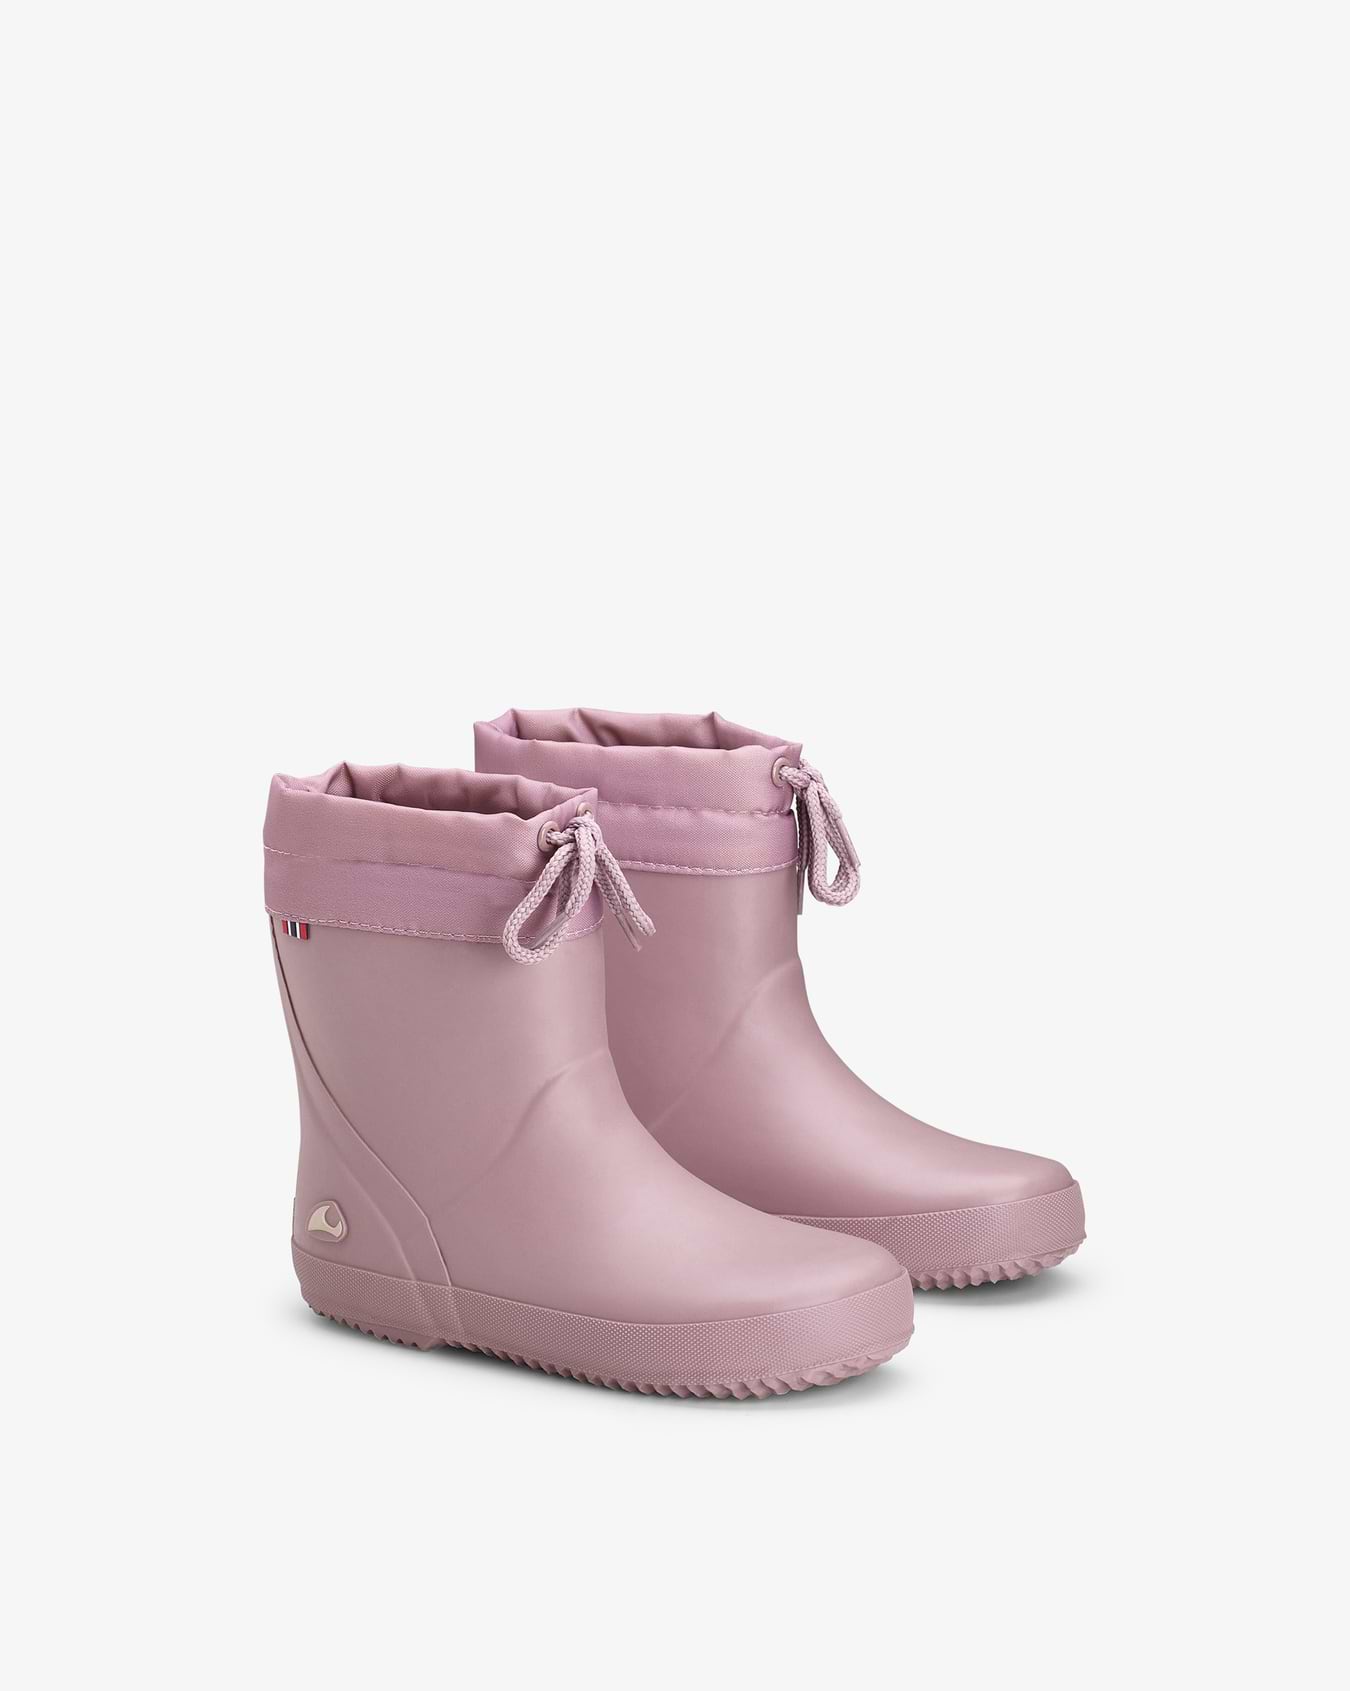 Viking Alv Indie Kids Rubber Boots Warmlined Pink